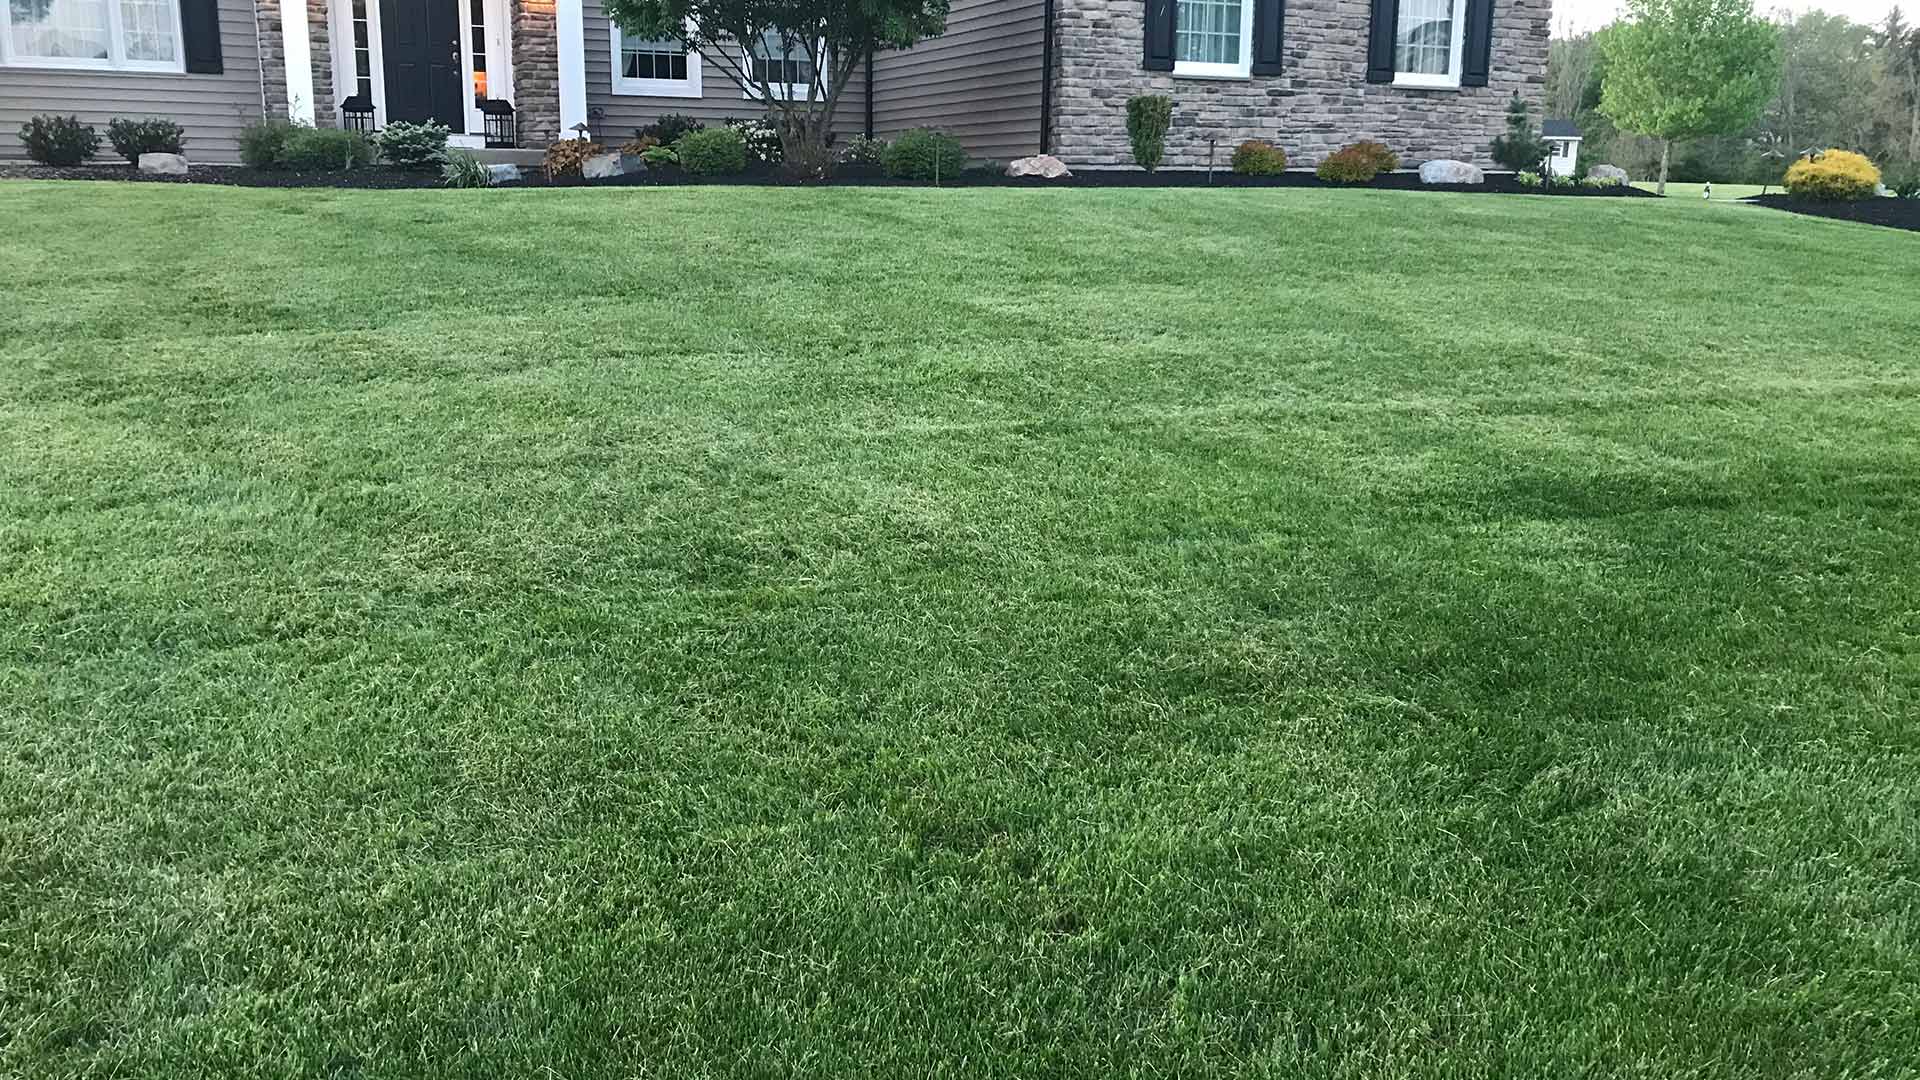 Deep green front lawn at a home in Bristol, Pennsylvania.